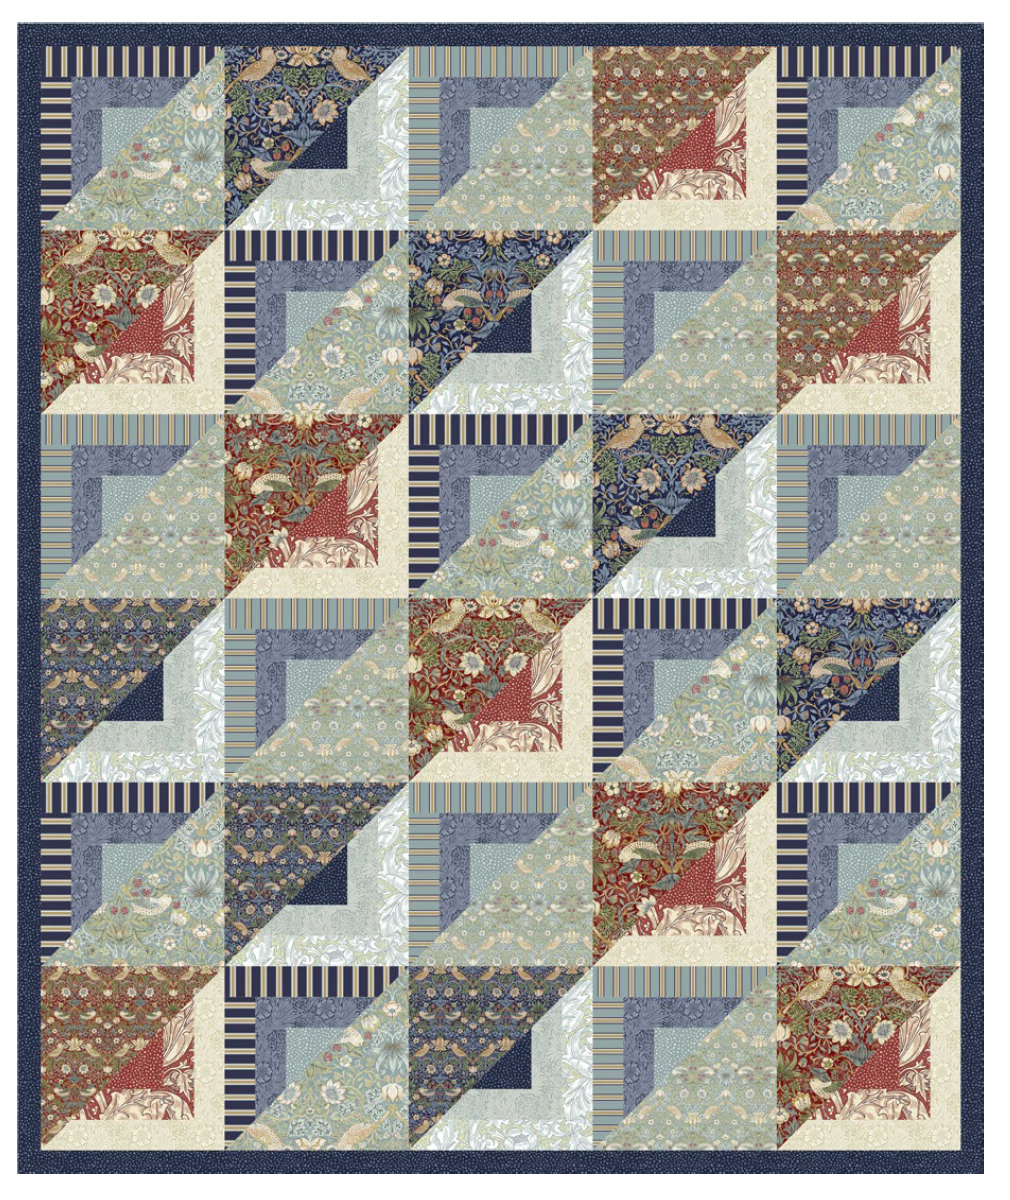 Free Pattern - Neighbours & Friends - William Morris Inspired